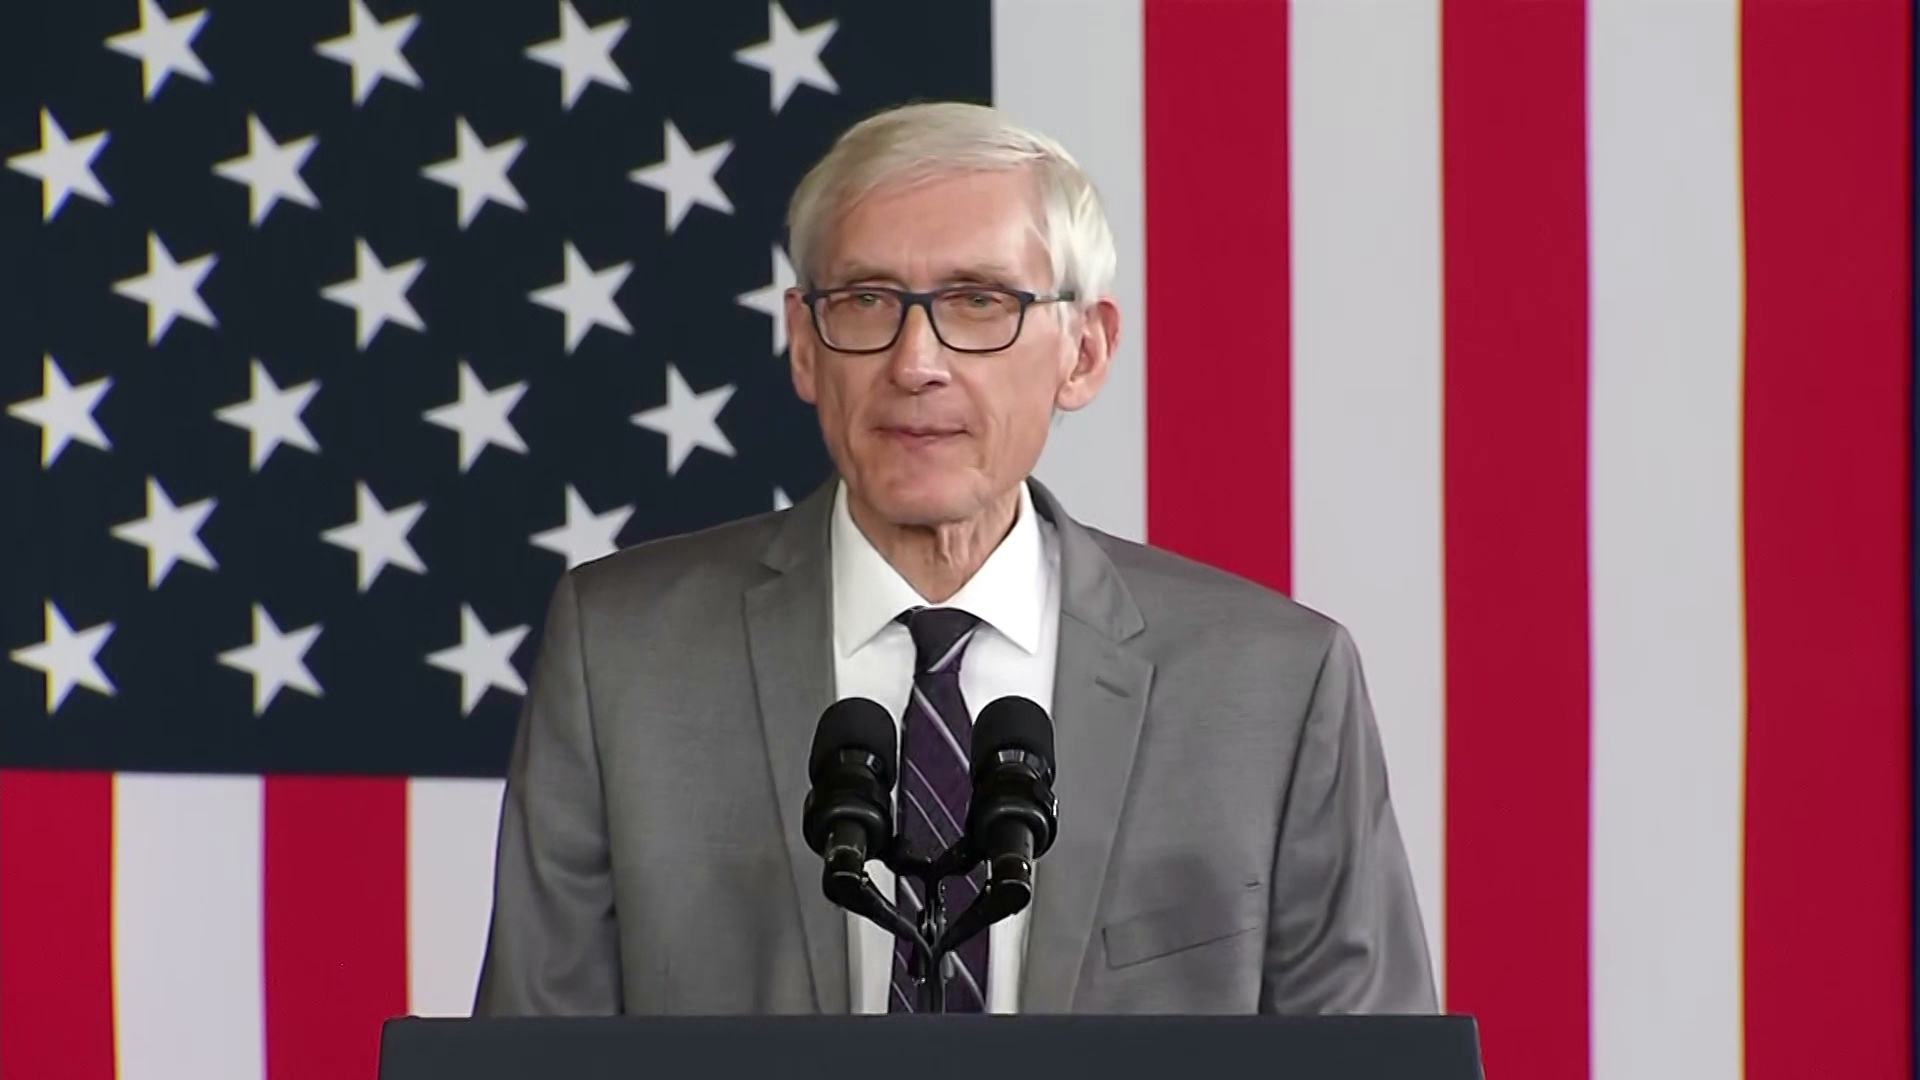 Tony Evers stands in front of a podium with two microphones in front of the backdrop of a U.S. flag.